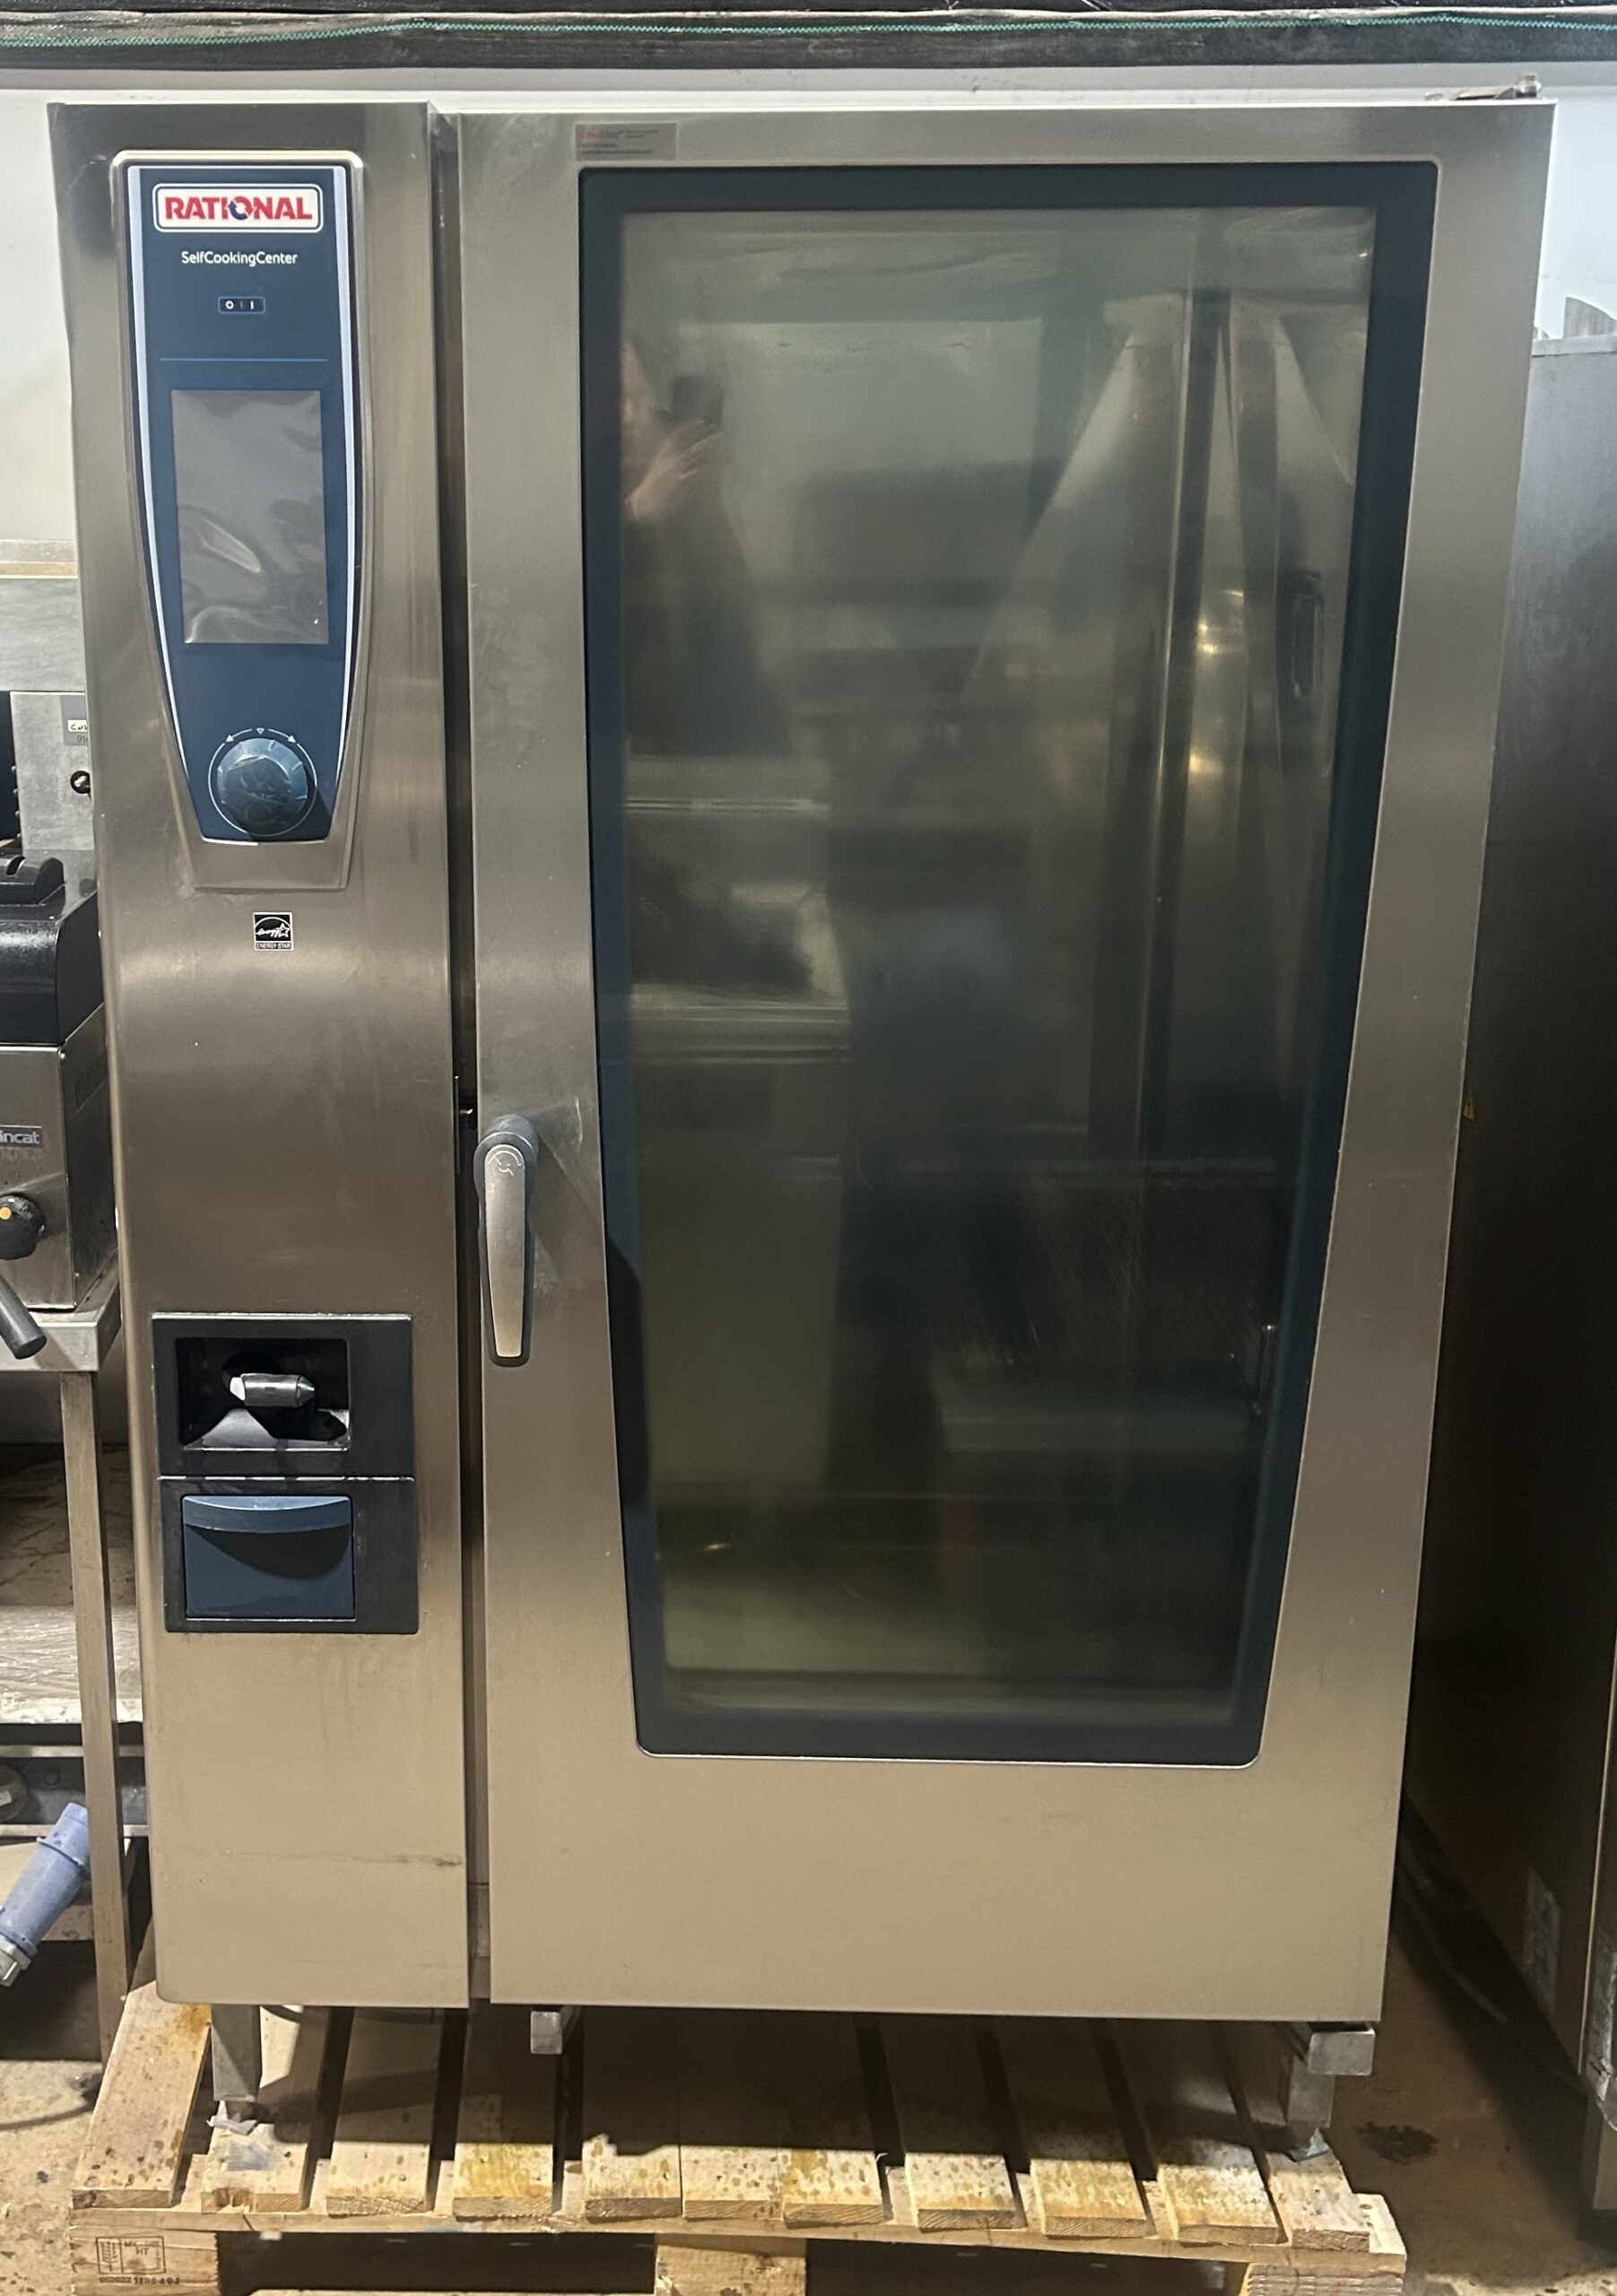 RATIONAL White Efficiency Gas 40 Grid Combi with Roll In Trolley